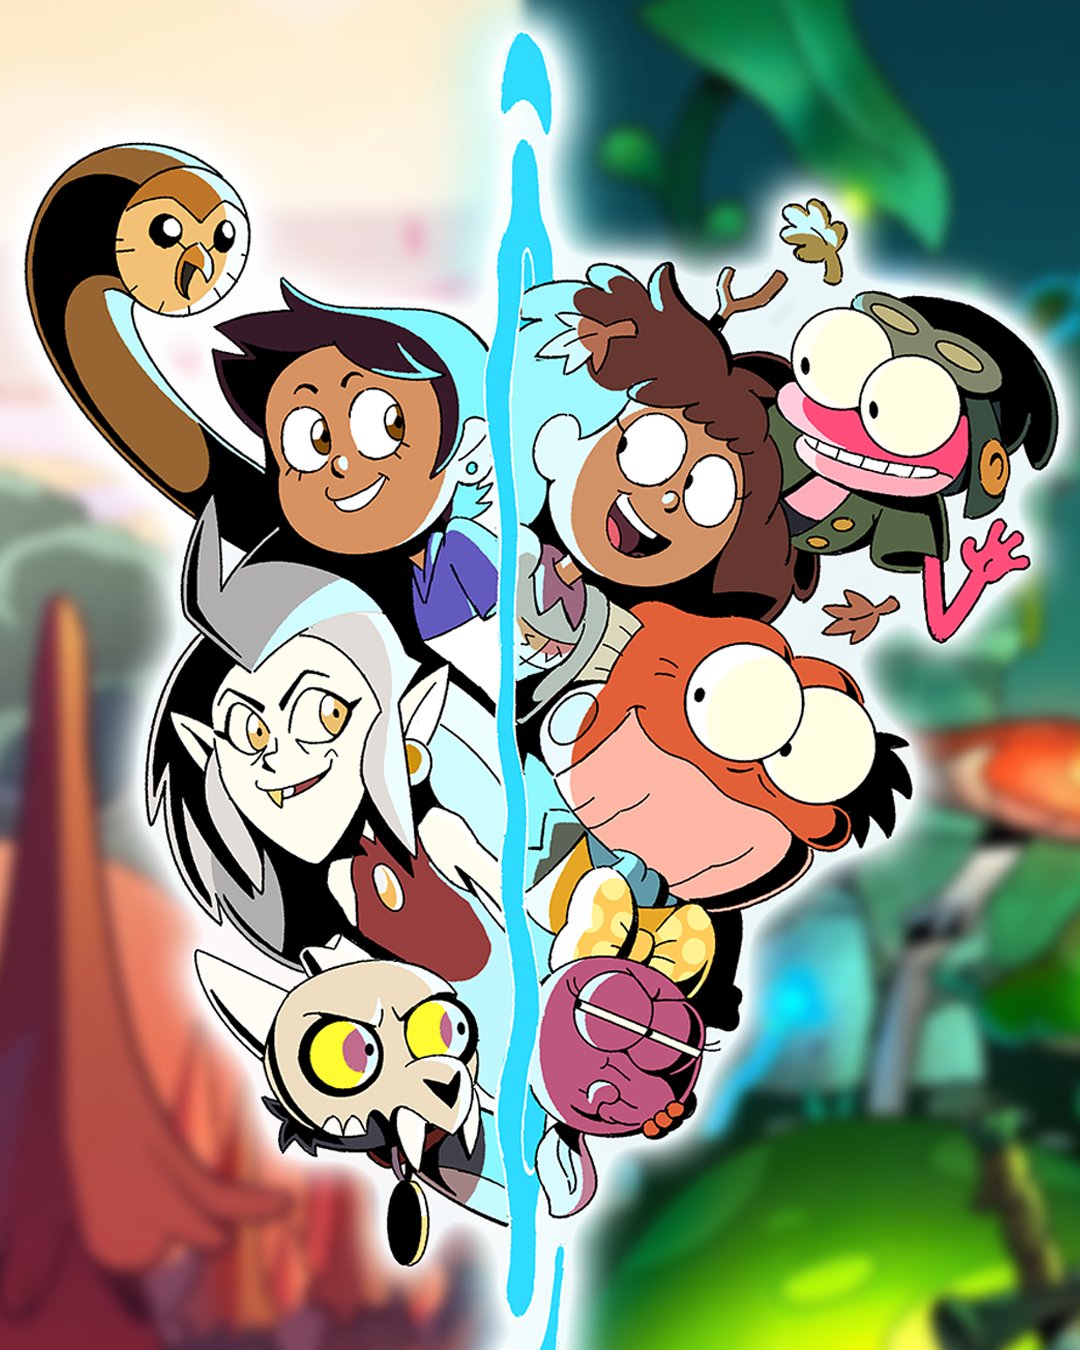 Amphibia and the Owl House